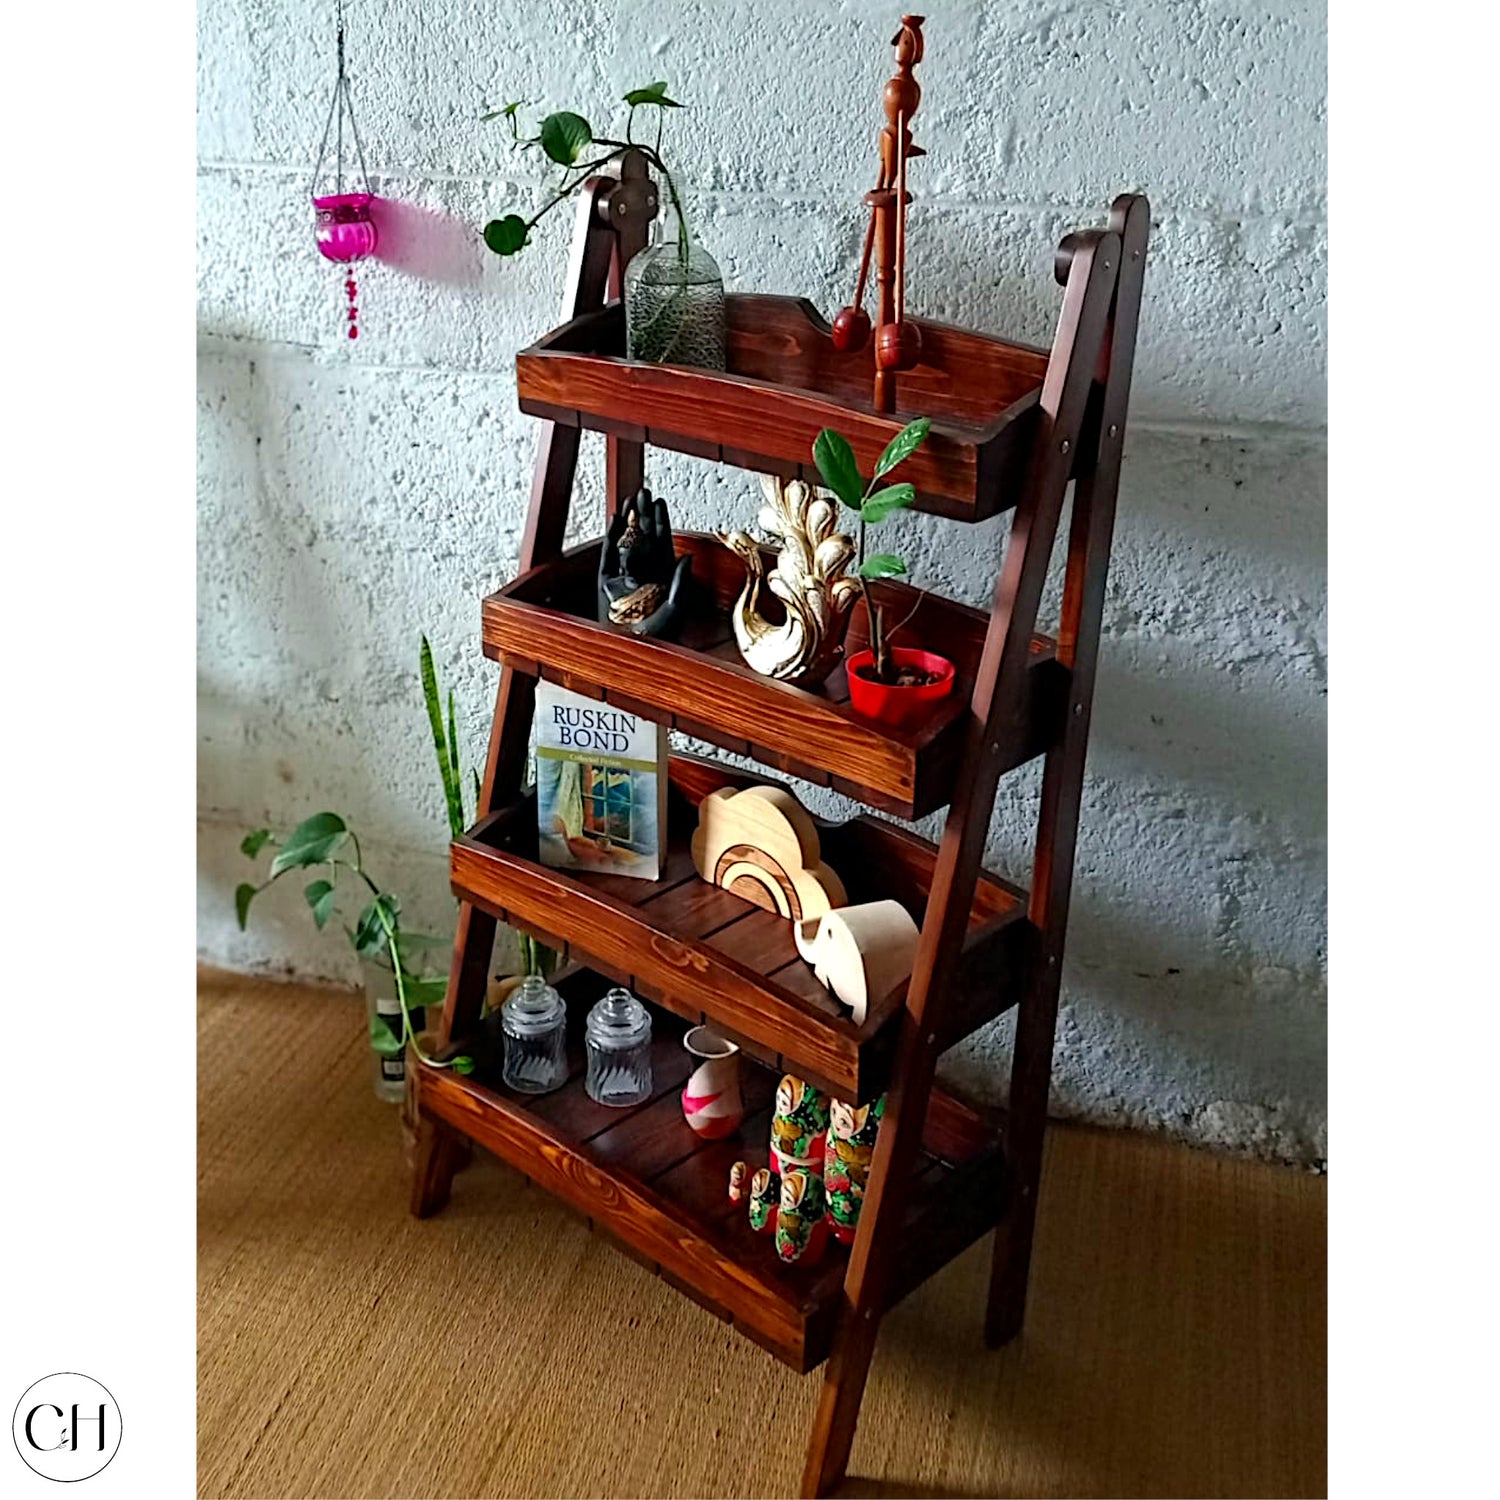 CustHum - Wooden ladder shelf with decorative items on each tier (ISO view) 